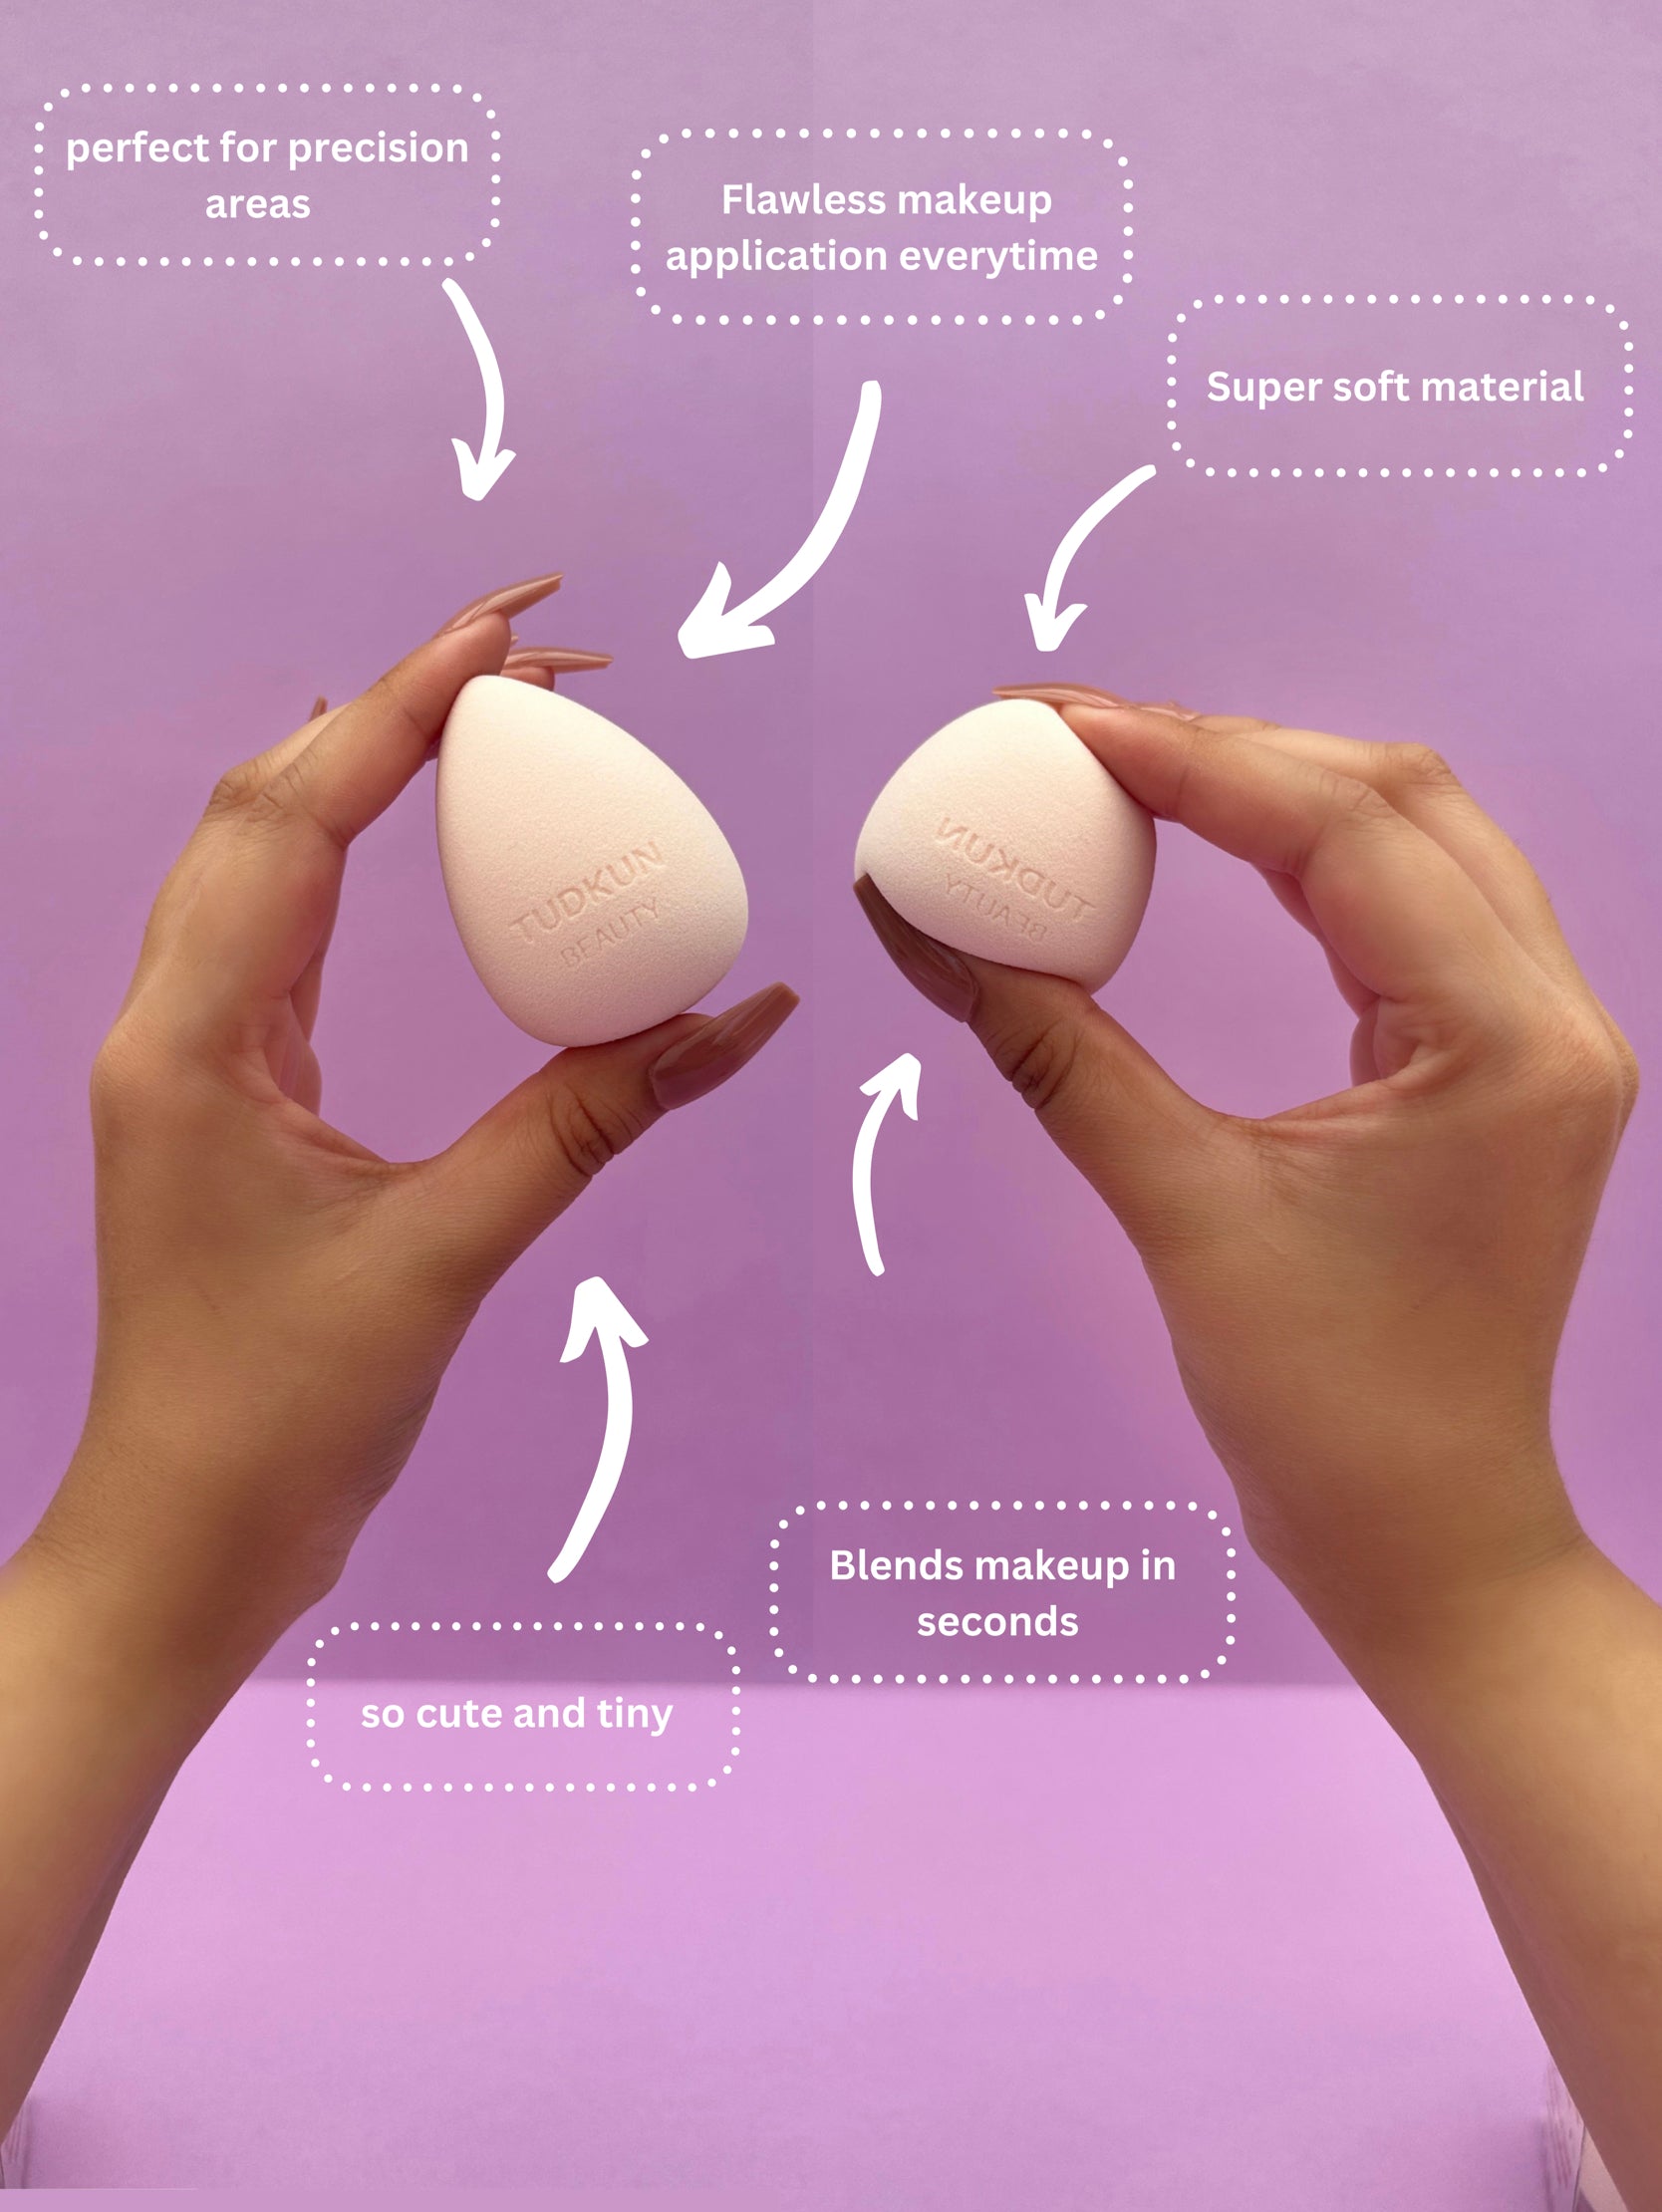 How to Use a Beautyblender for Even, Blended Makeup